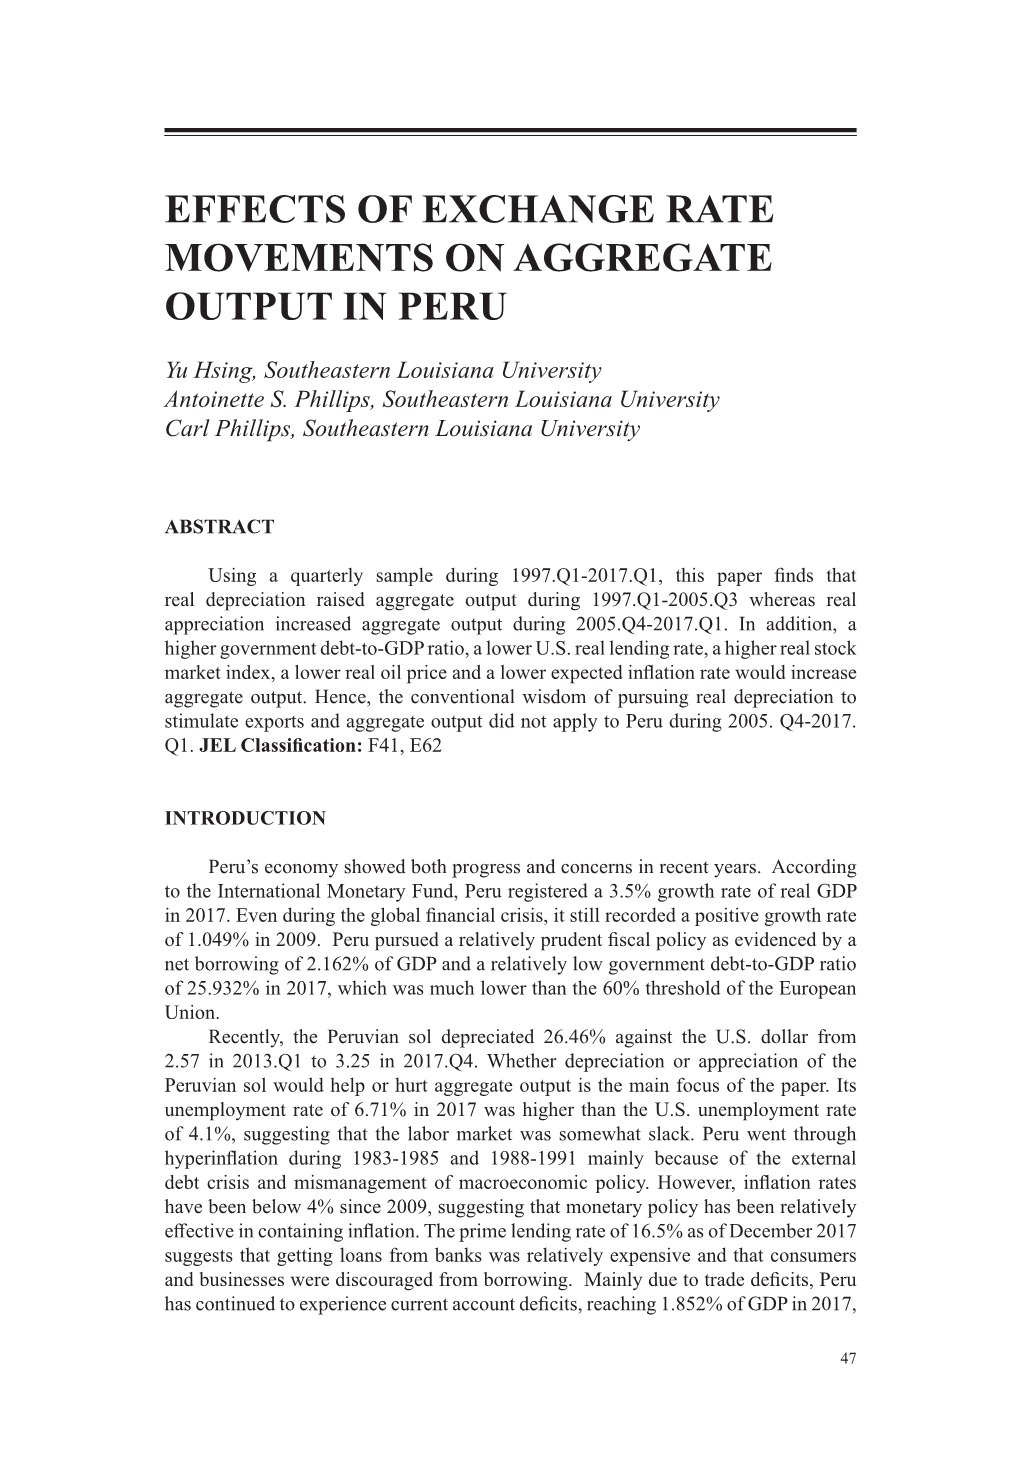 Effects of Exchange Rate Movements on Aggregate Output in Peru